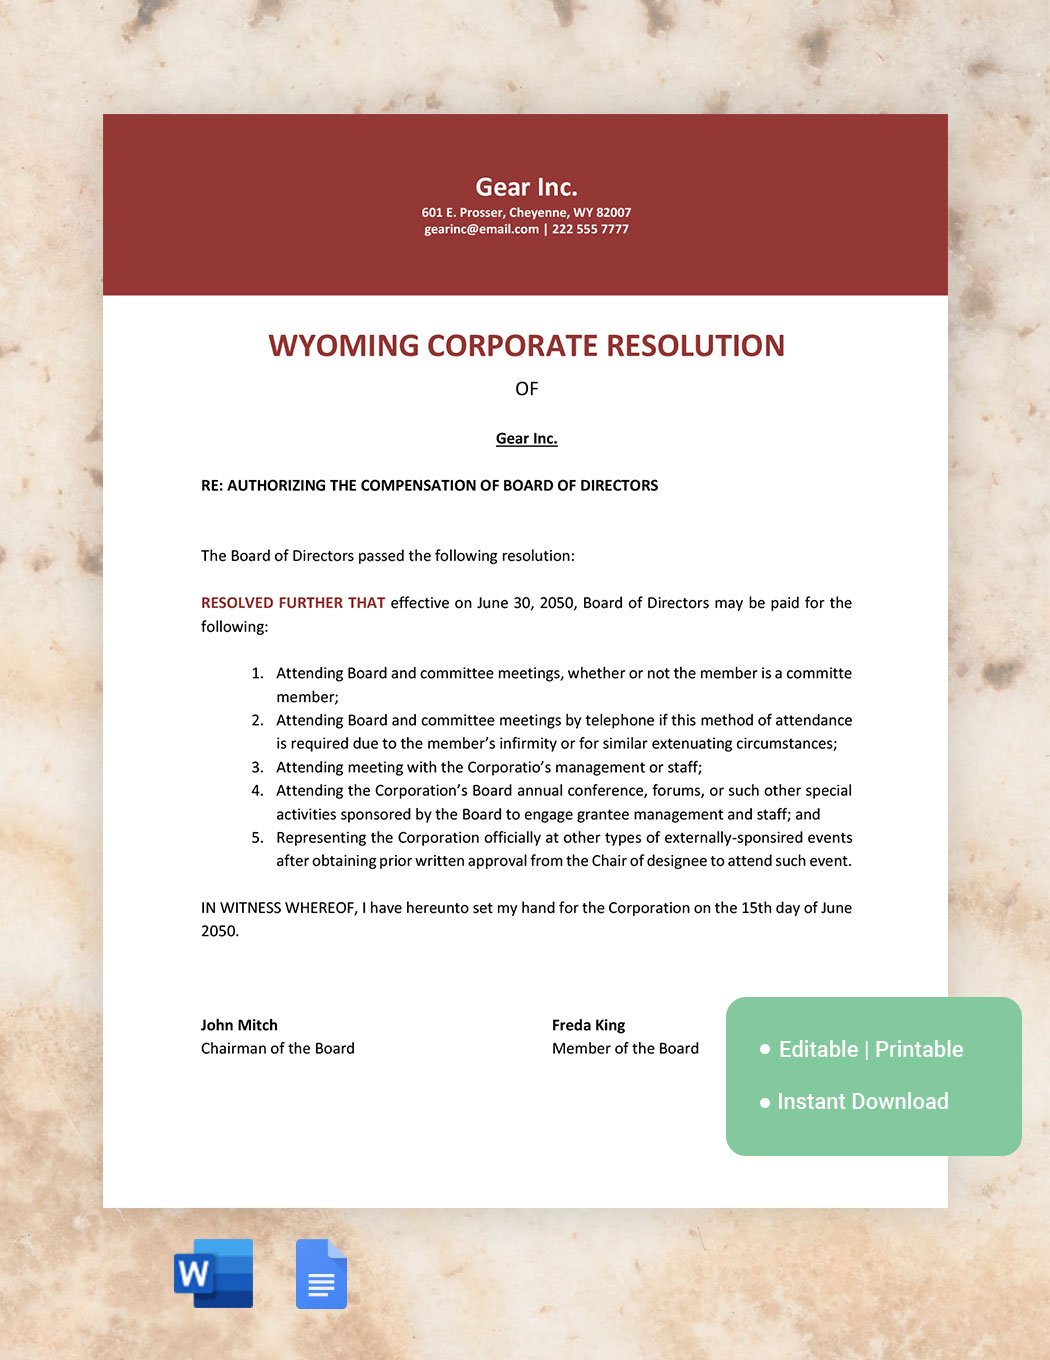 Wyoming Corporate Resolution Template in Word, Google Docs